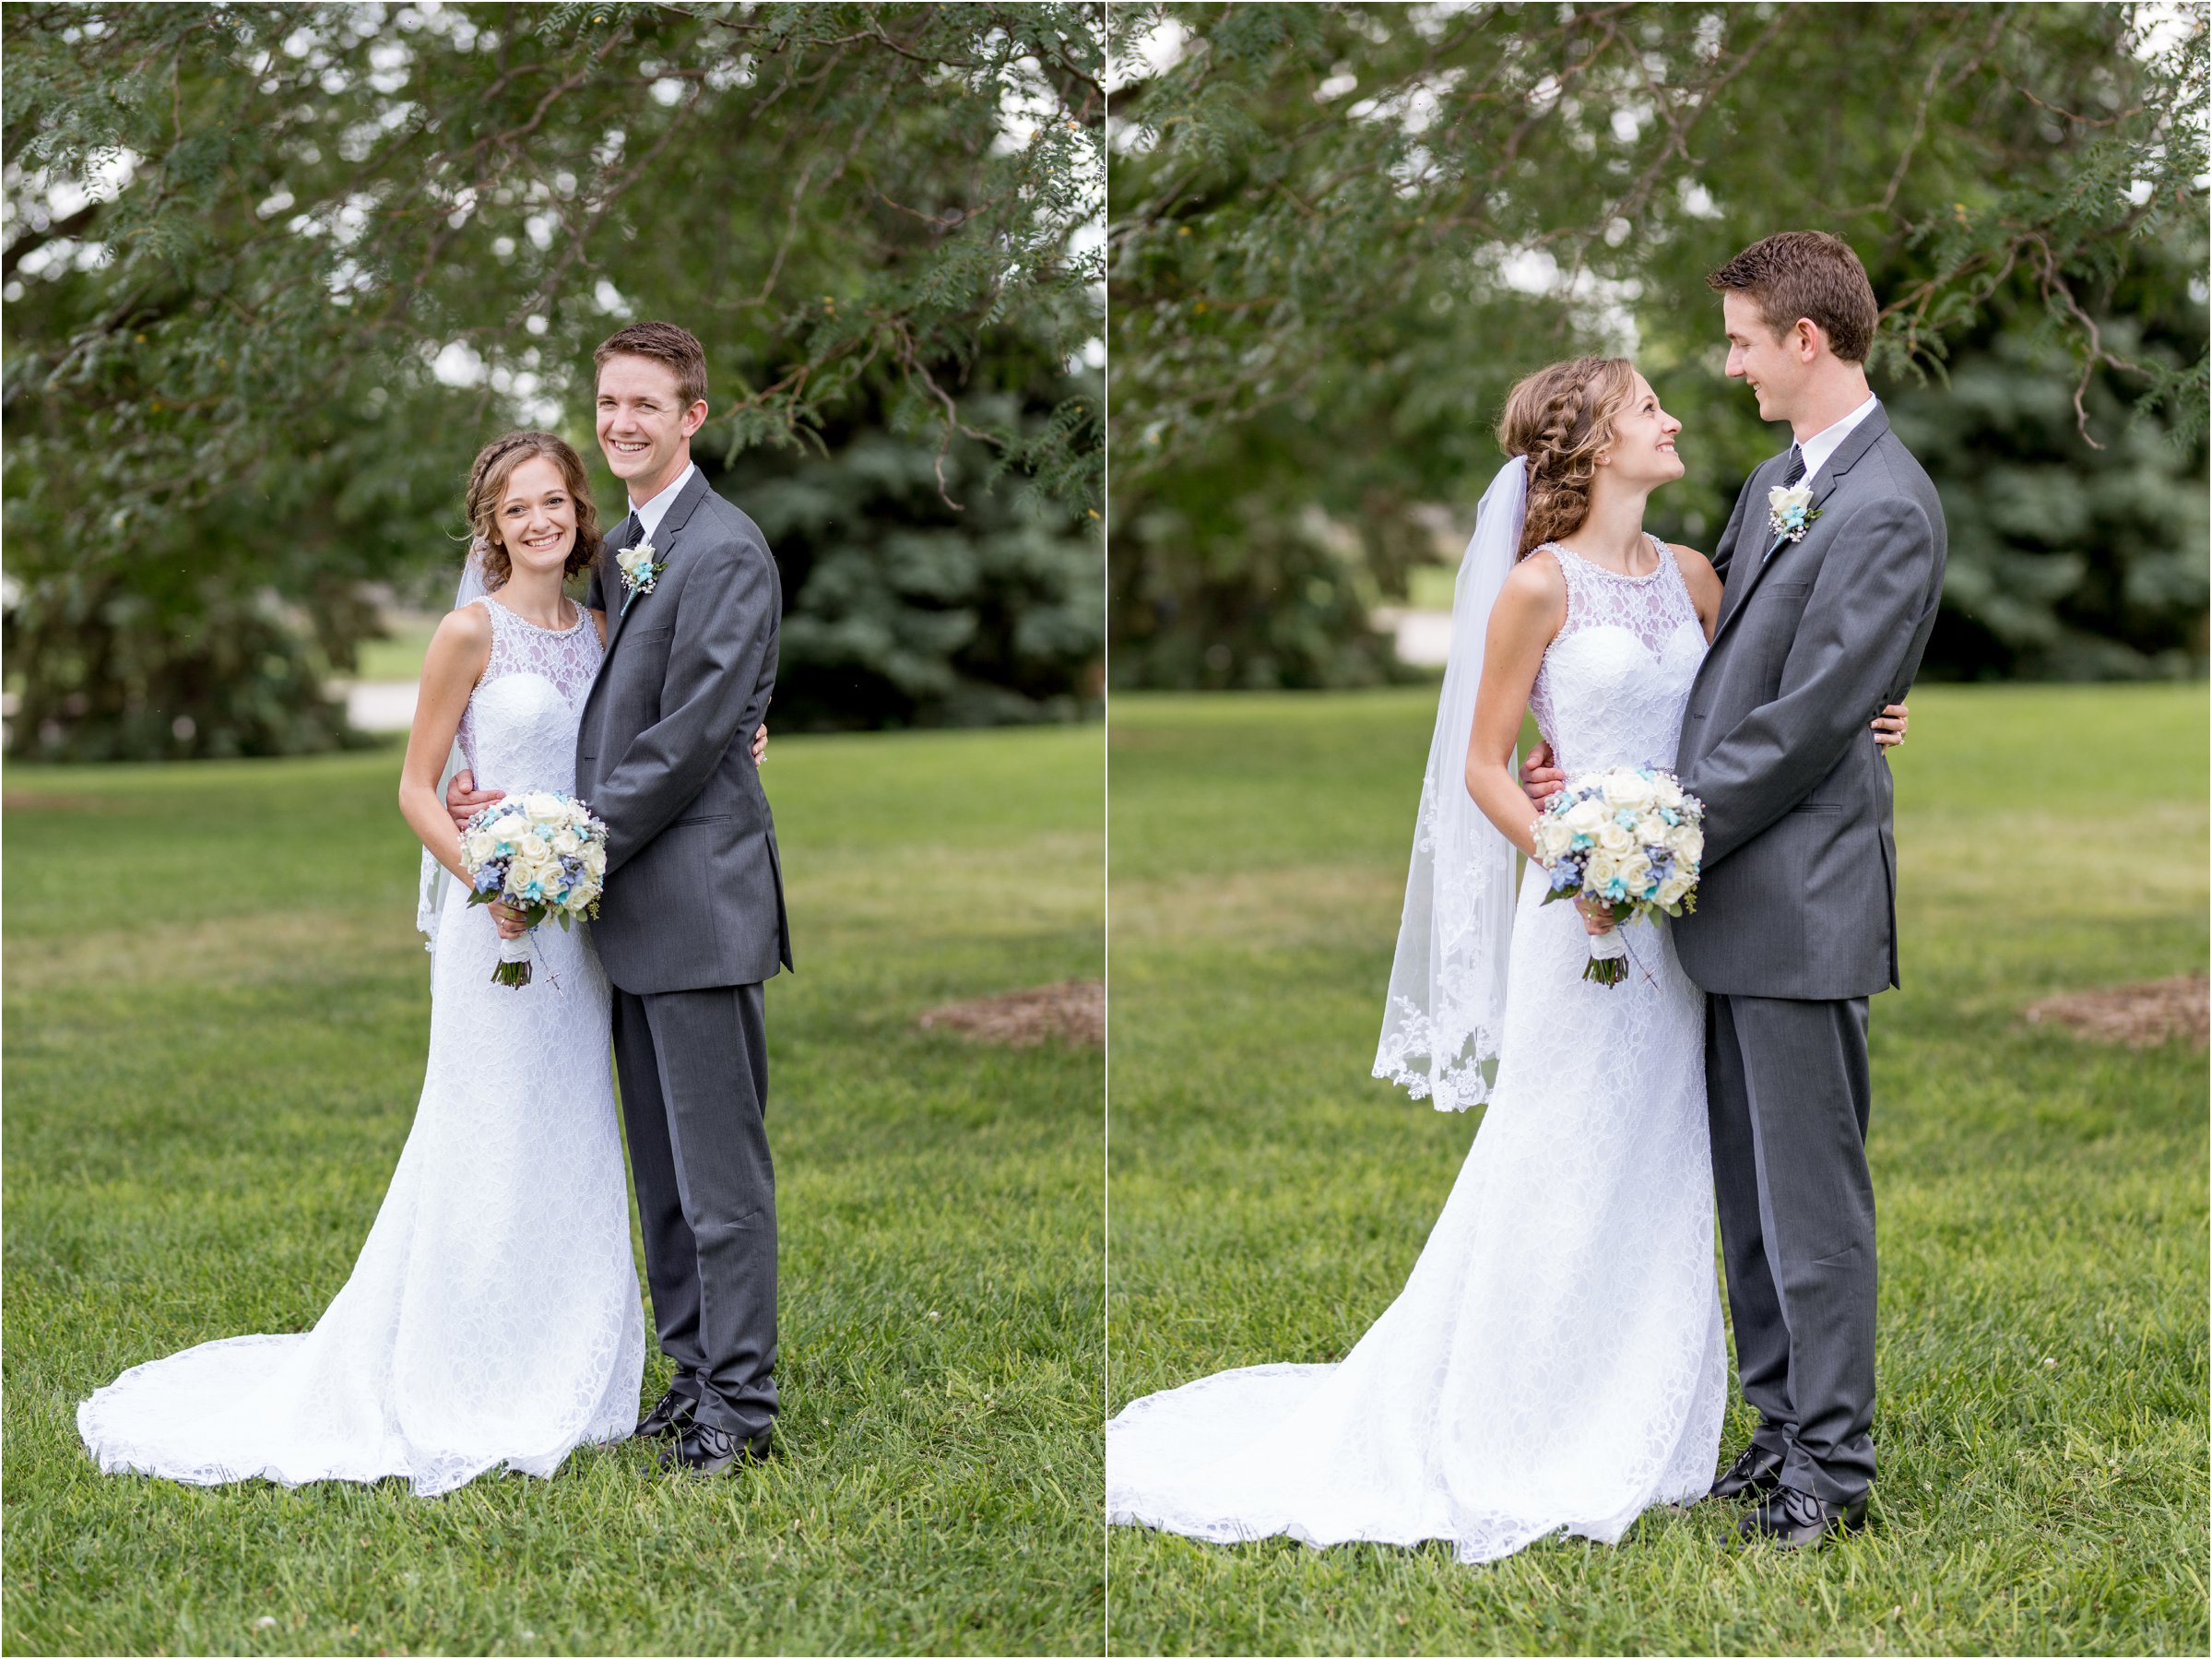 bride and groom pose in front of trees in wedding dress and tuxedo